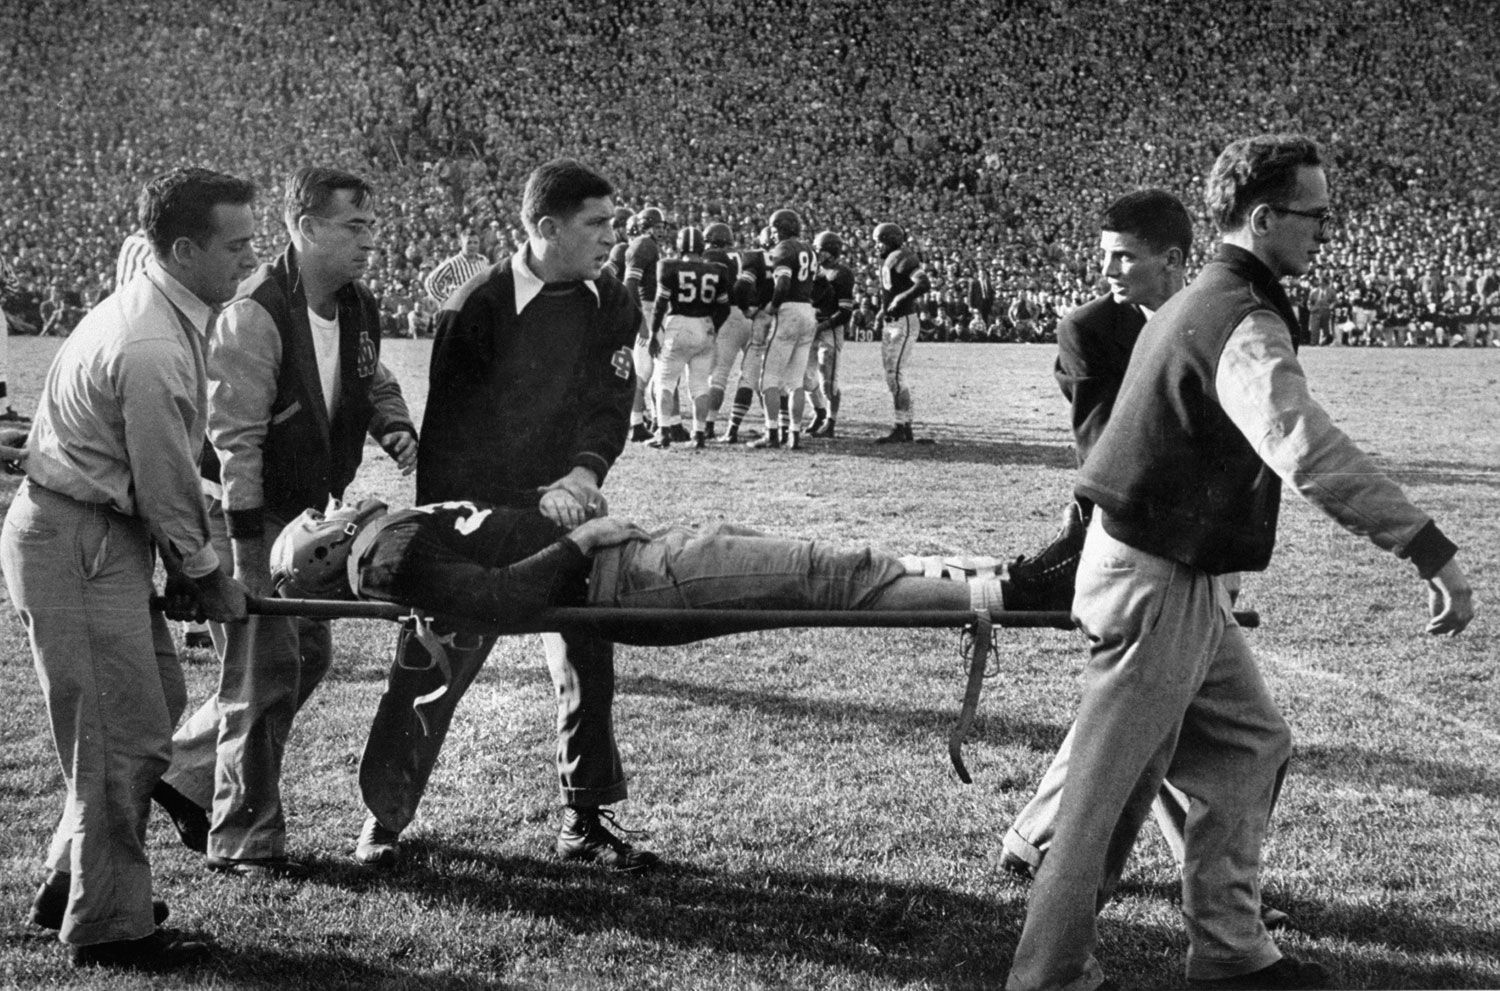 A player is carried from the field with a broken collar bone during a 1952 Notre Dame-Michigan game.